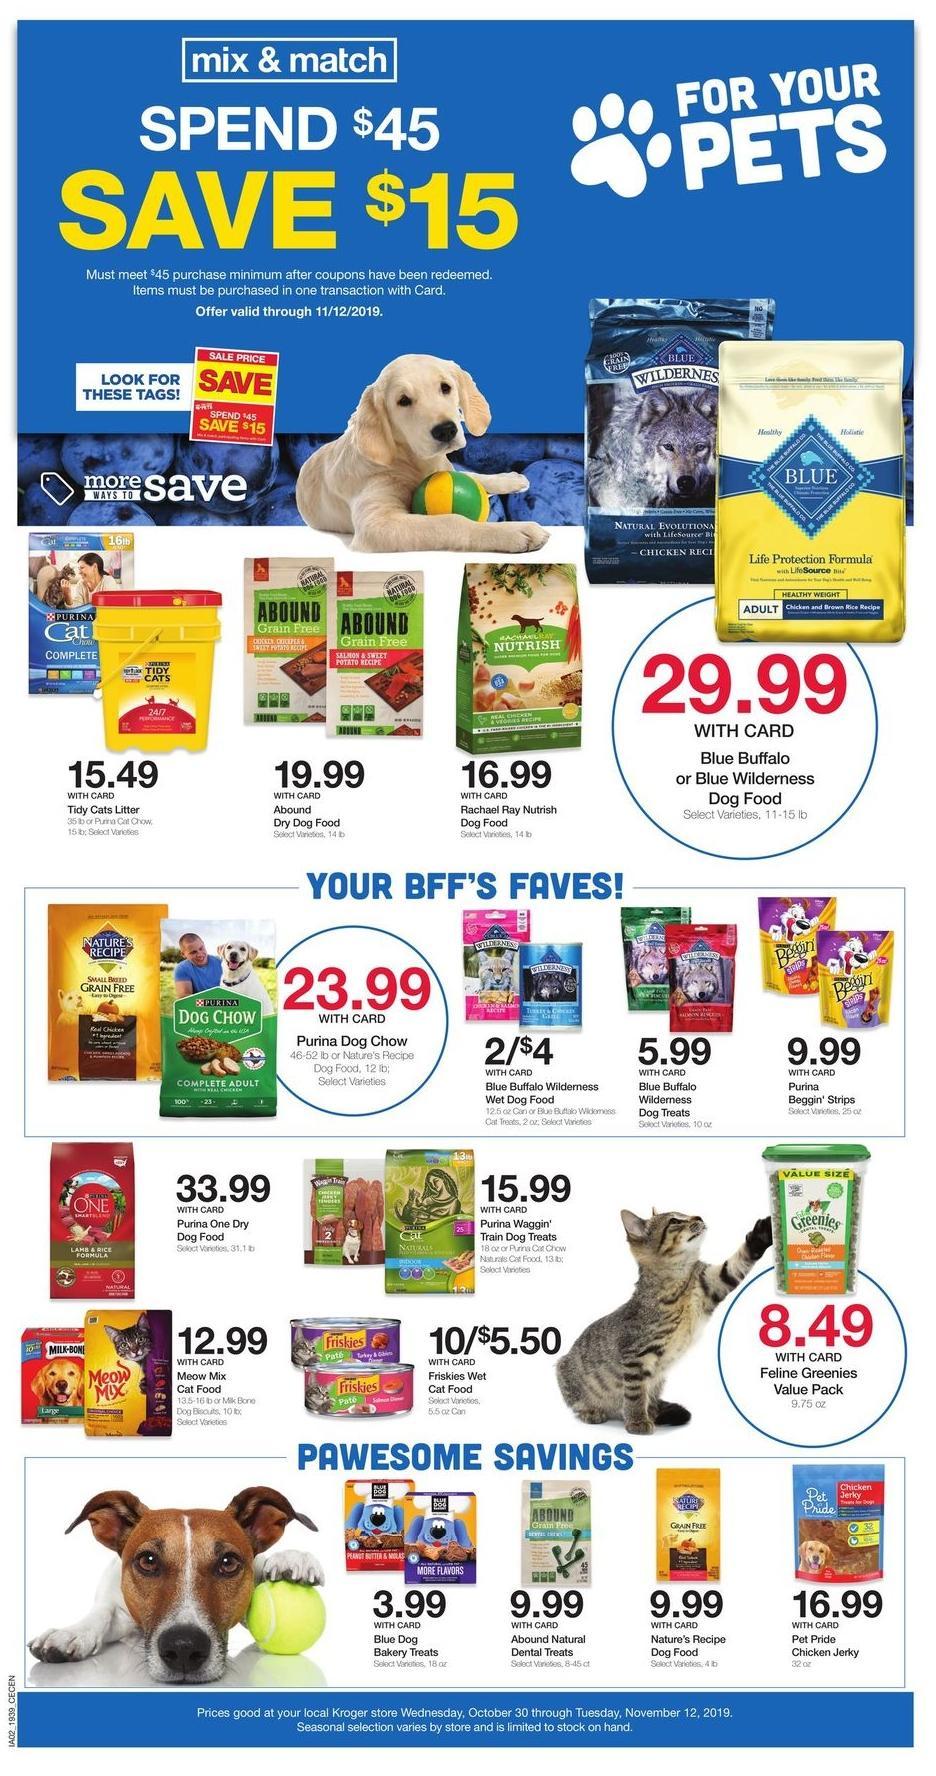 Kroger Weekly Ad from October 30